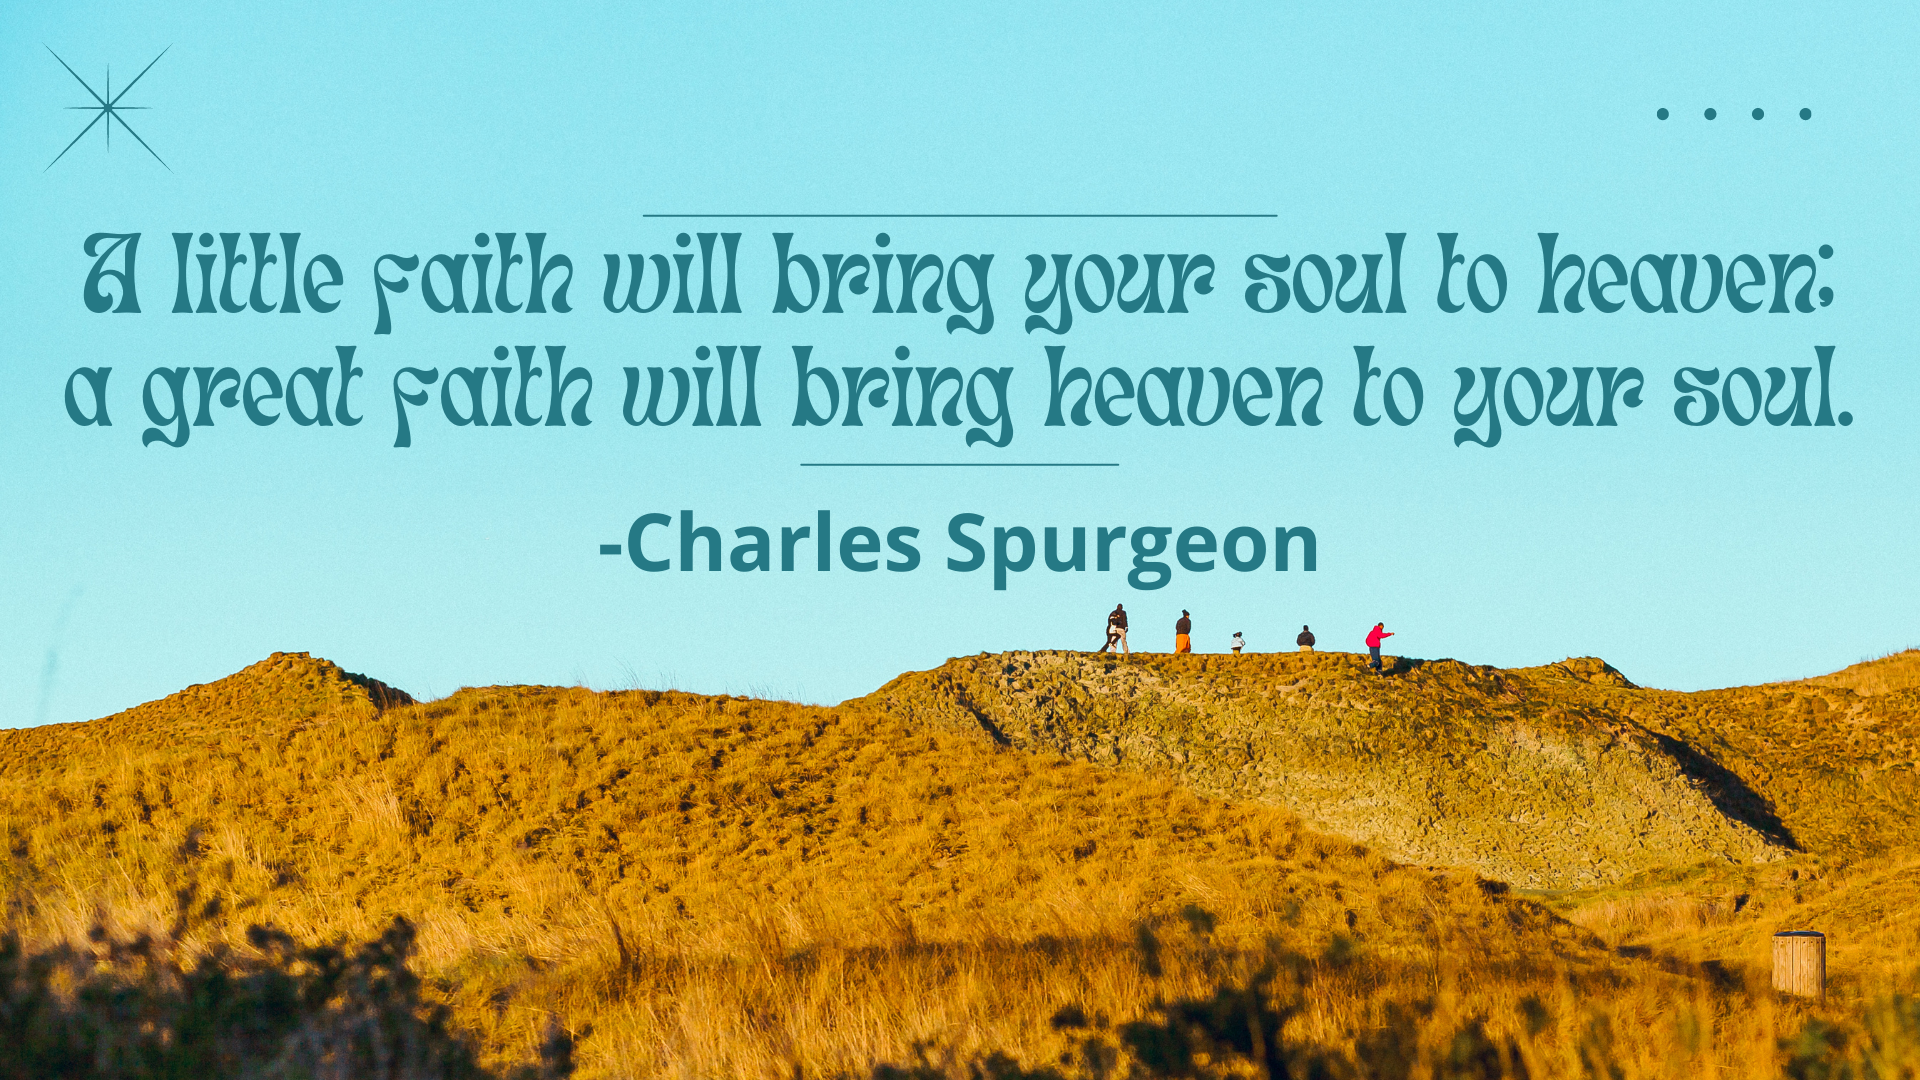 Quotes by charles spurgeon 